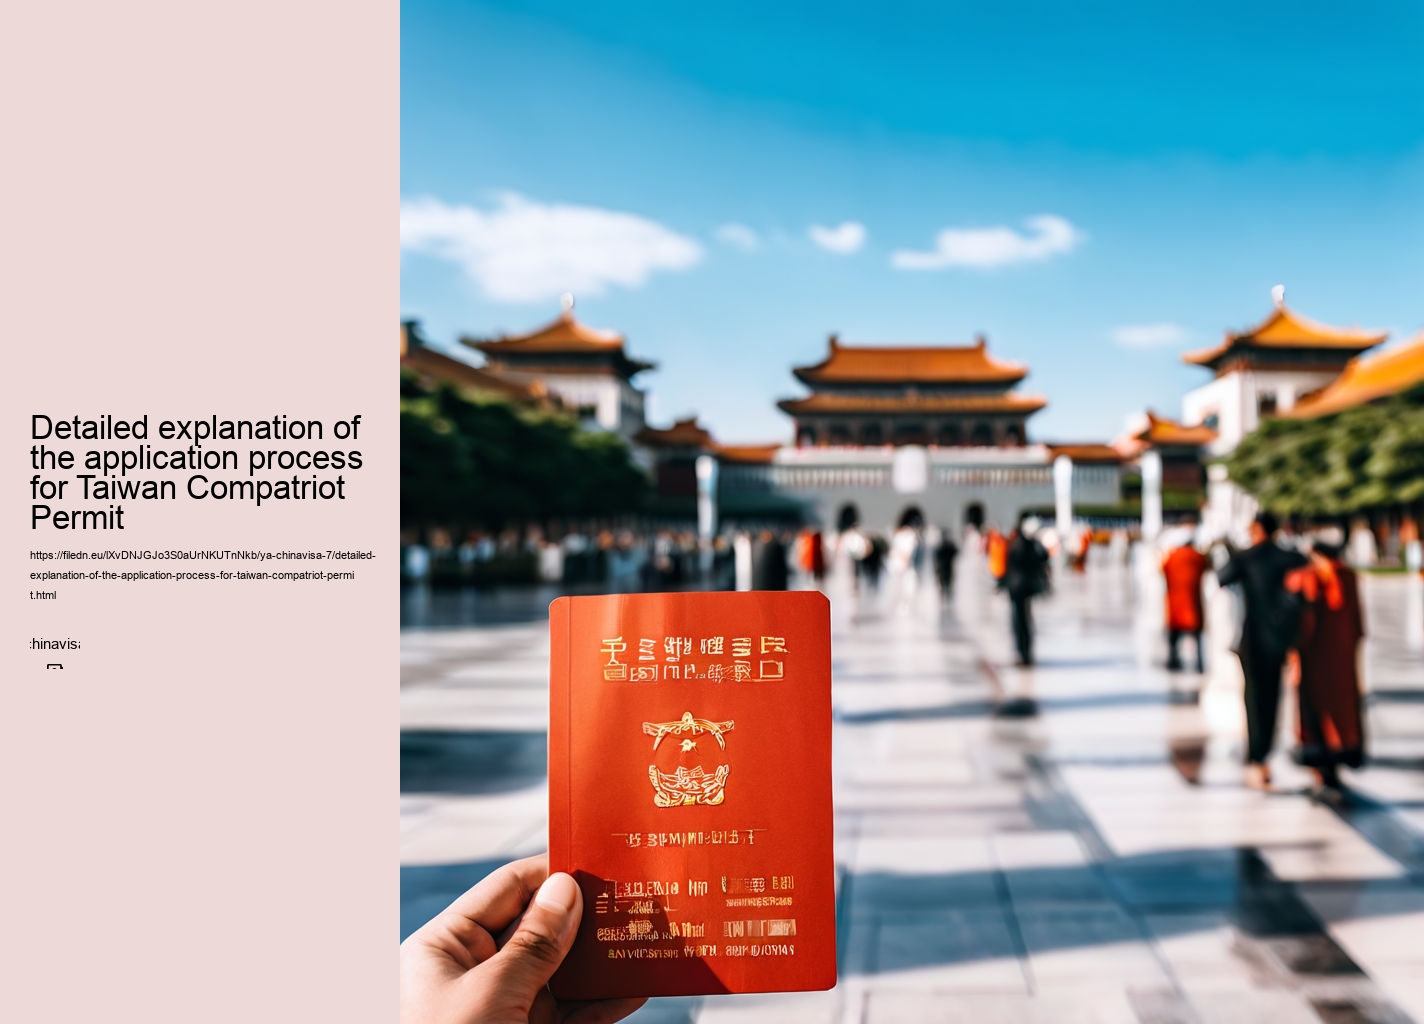 Detailed explanation of the application process for Taiwan Compatriot Permit